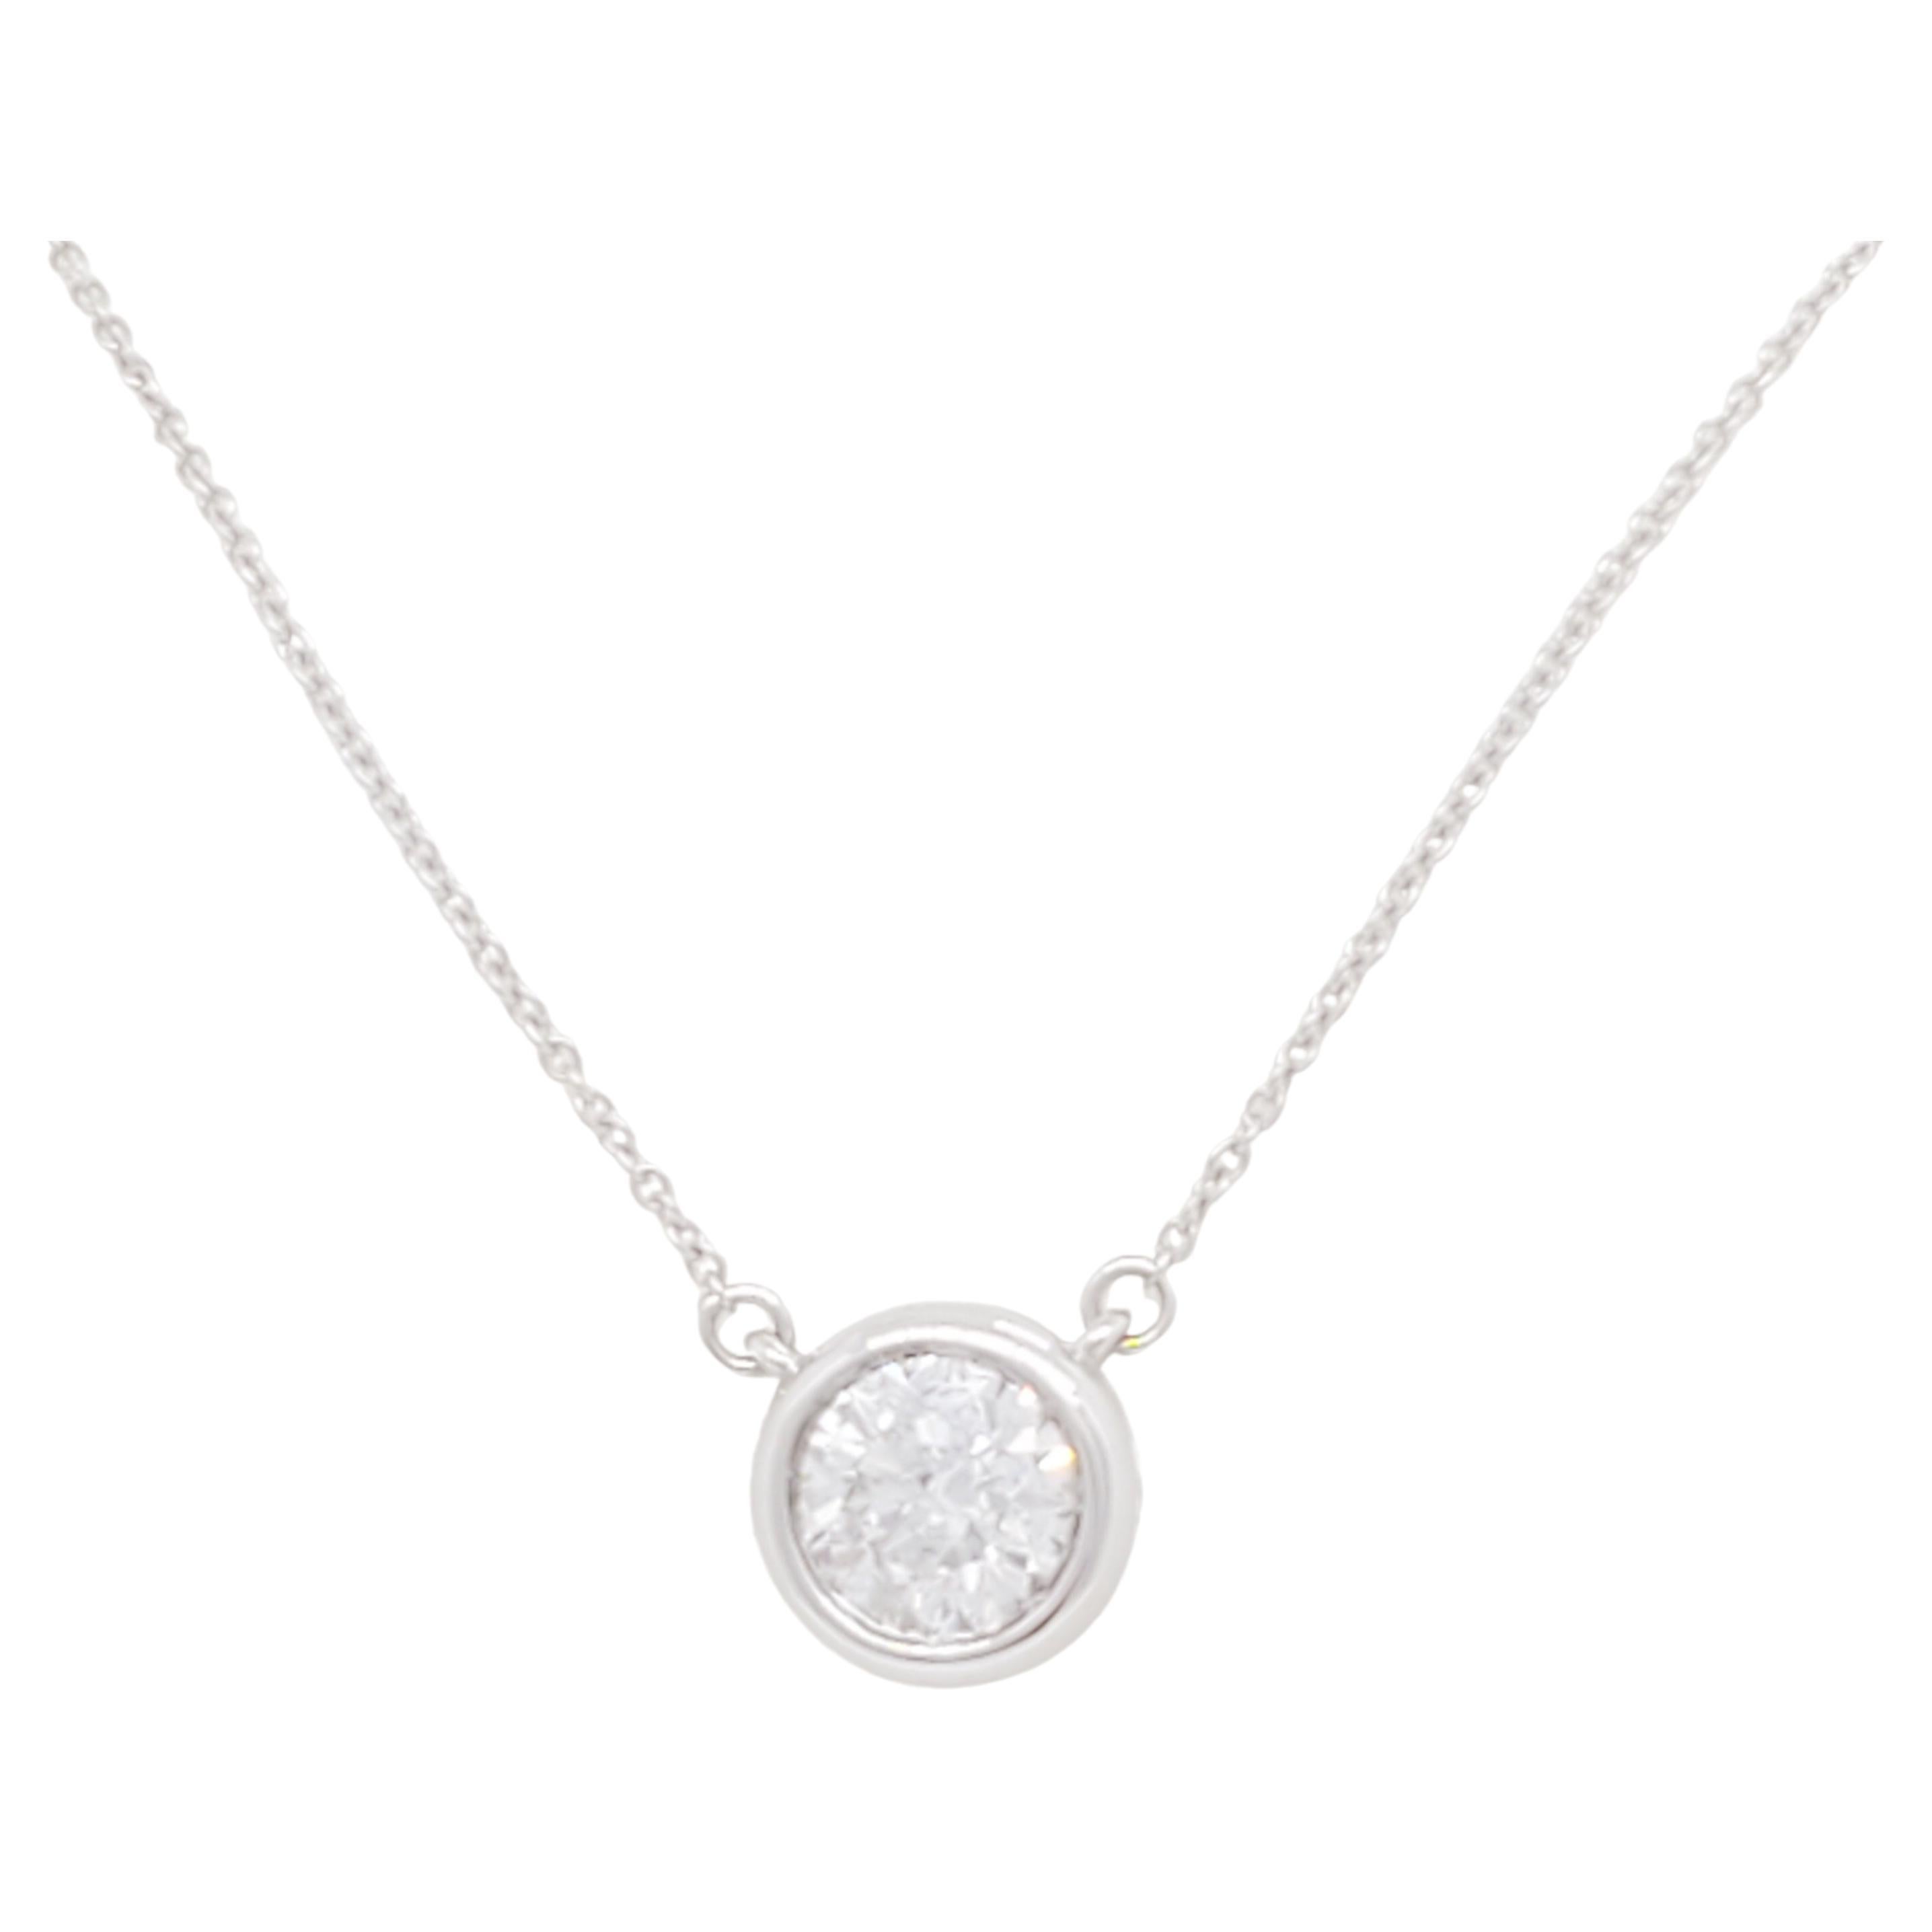 Handmade 14K White Gold Round Shape Solitaire Necklace With 0.10 Carat Diamond 